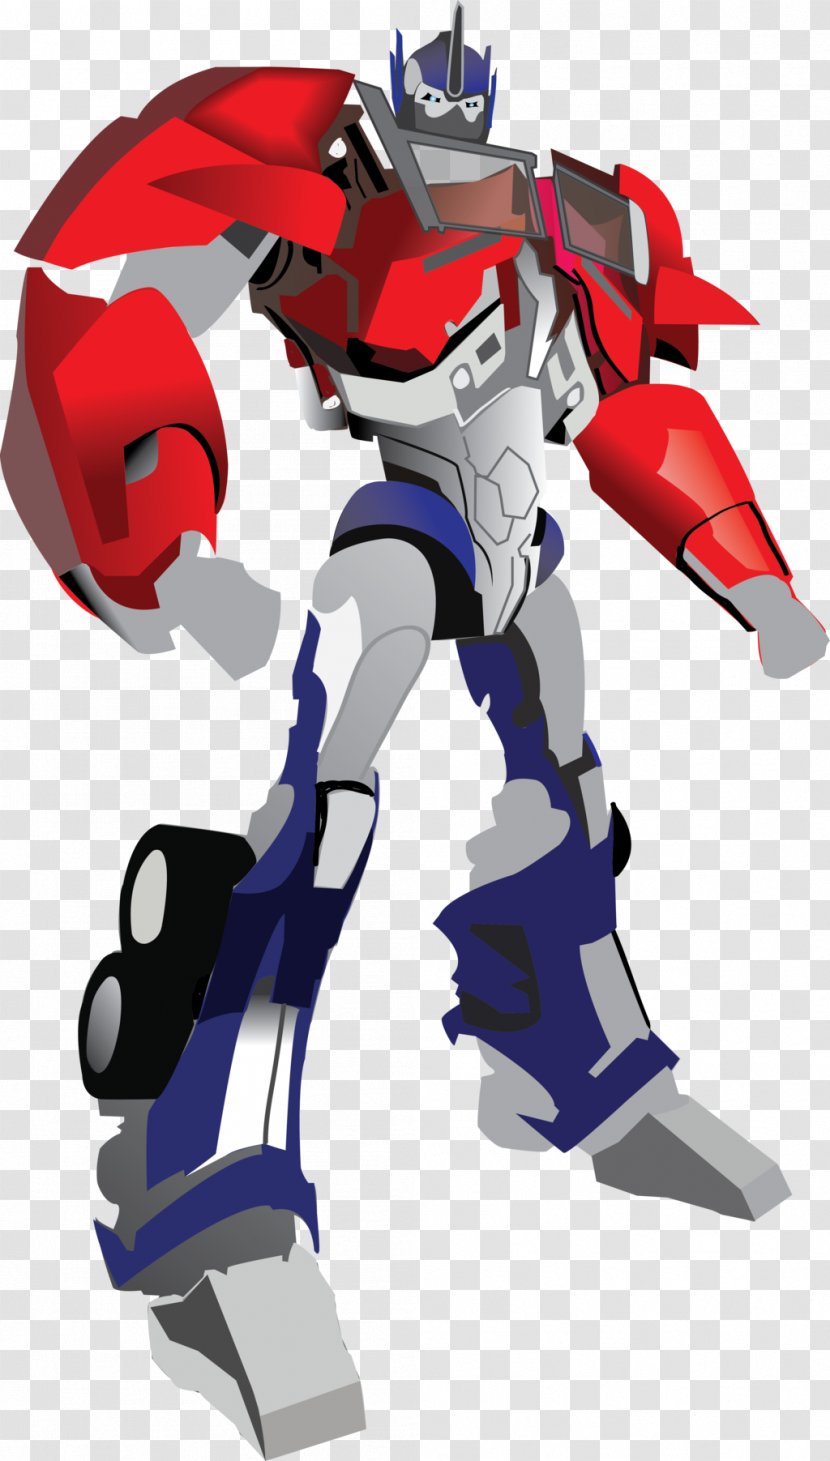 Optimus Prime Transformers: War For Cybertron Bumblebee Autobot - Transformers Transparent PNG